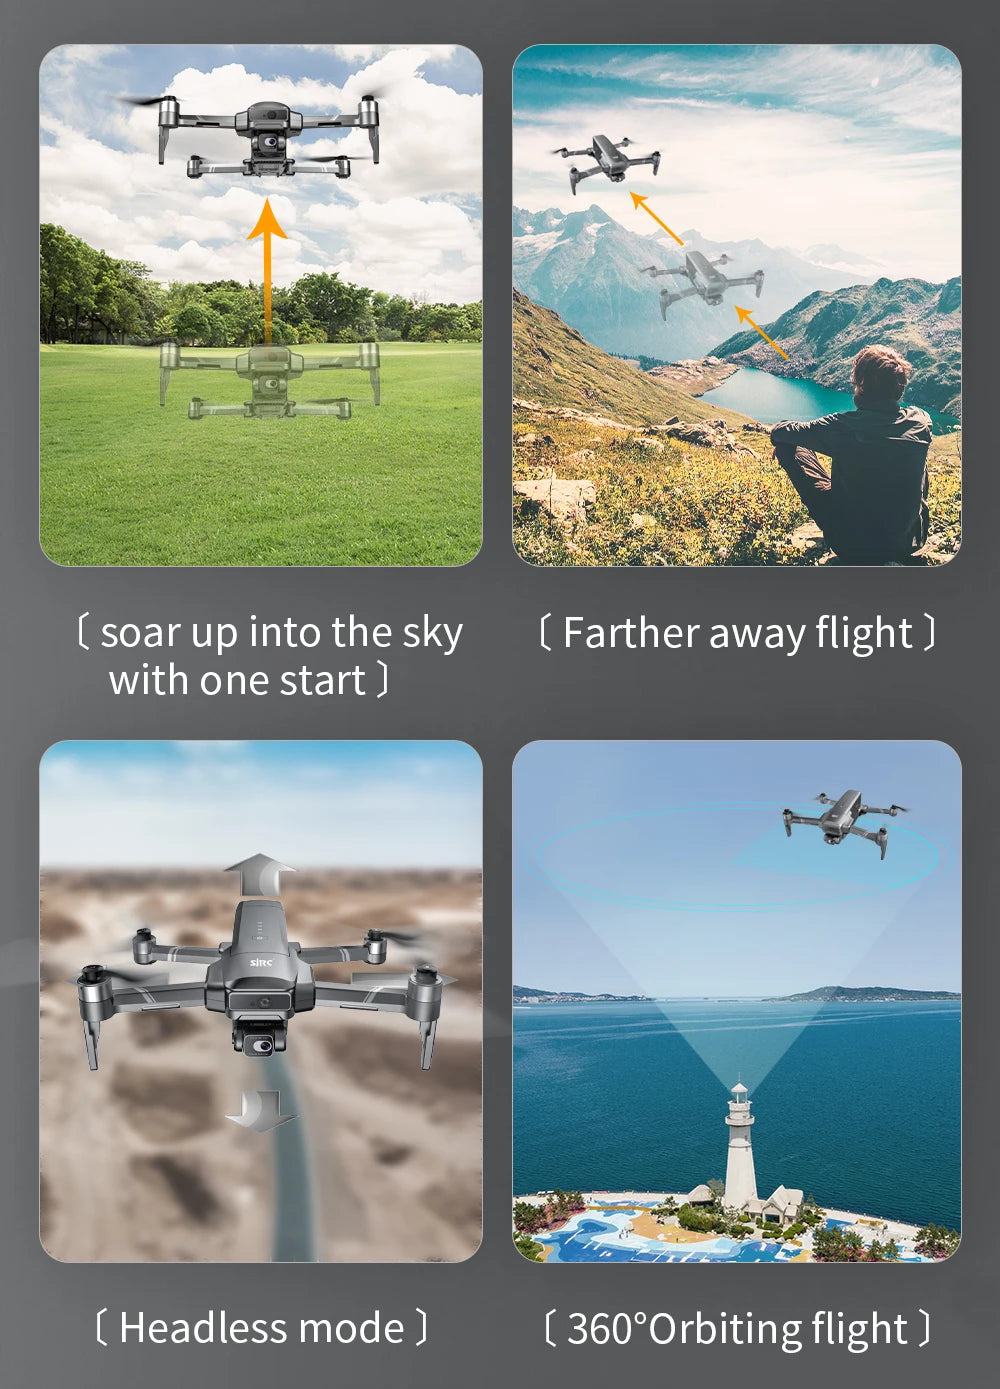 SJRC F22S 4K HD PRO Drone, make photo gestures/camera gestures within a 1-3m distance from the aircraft